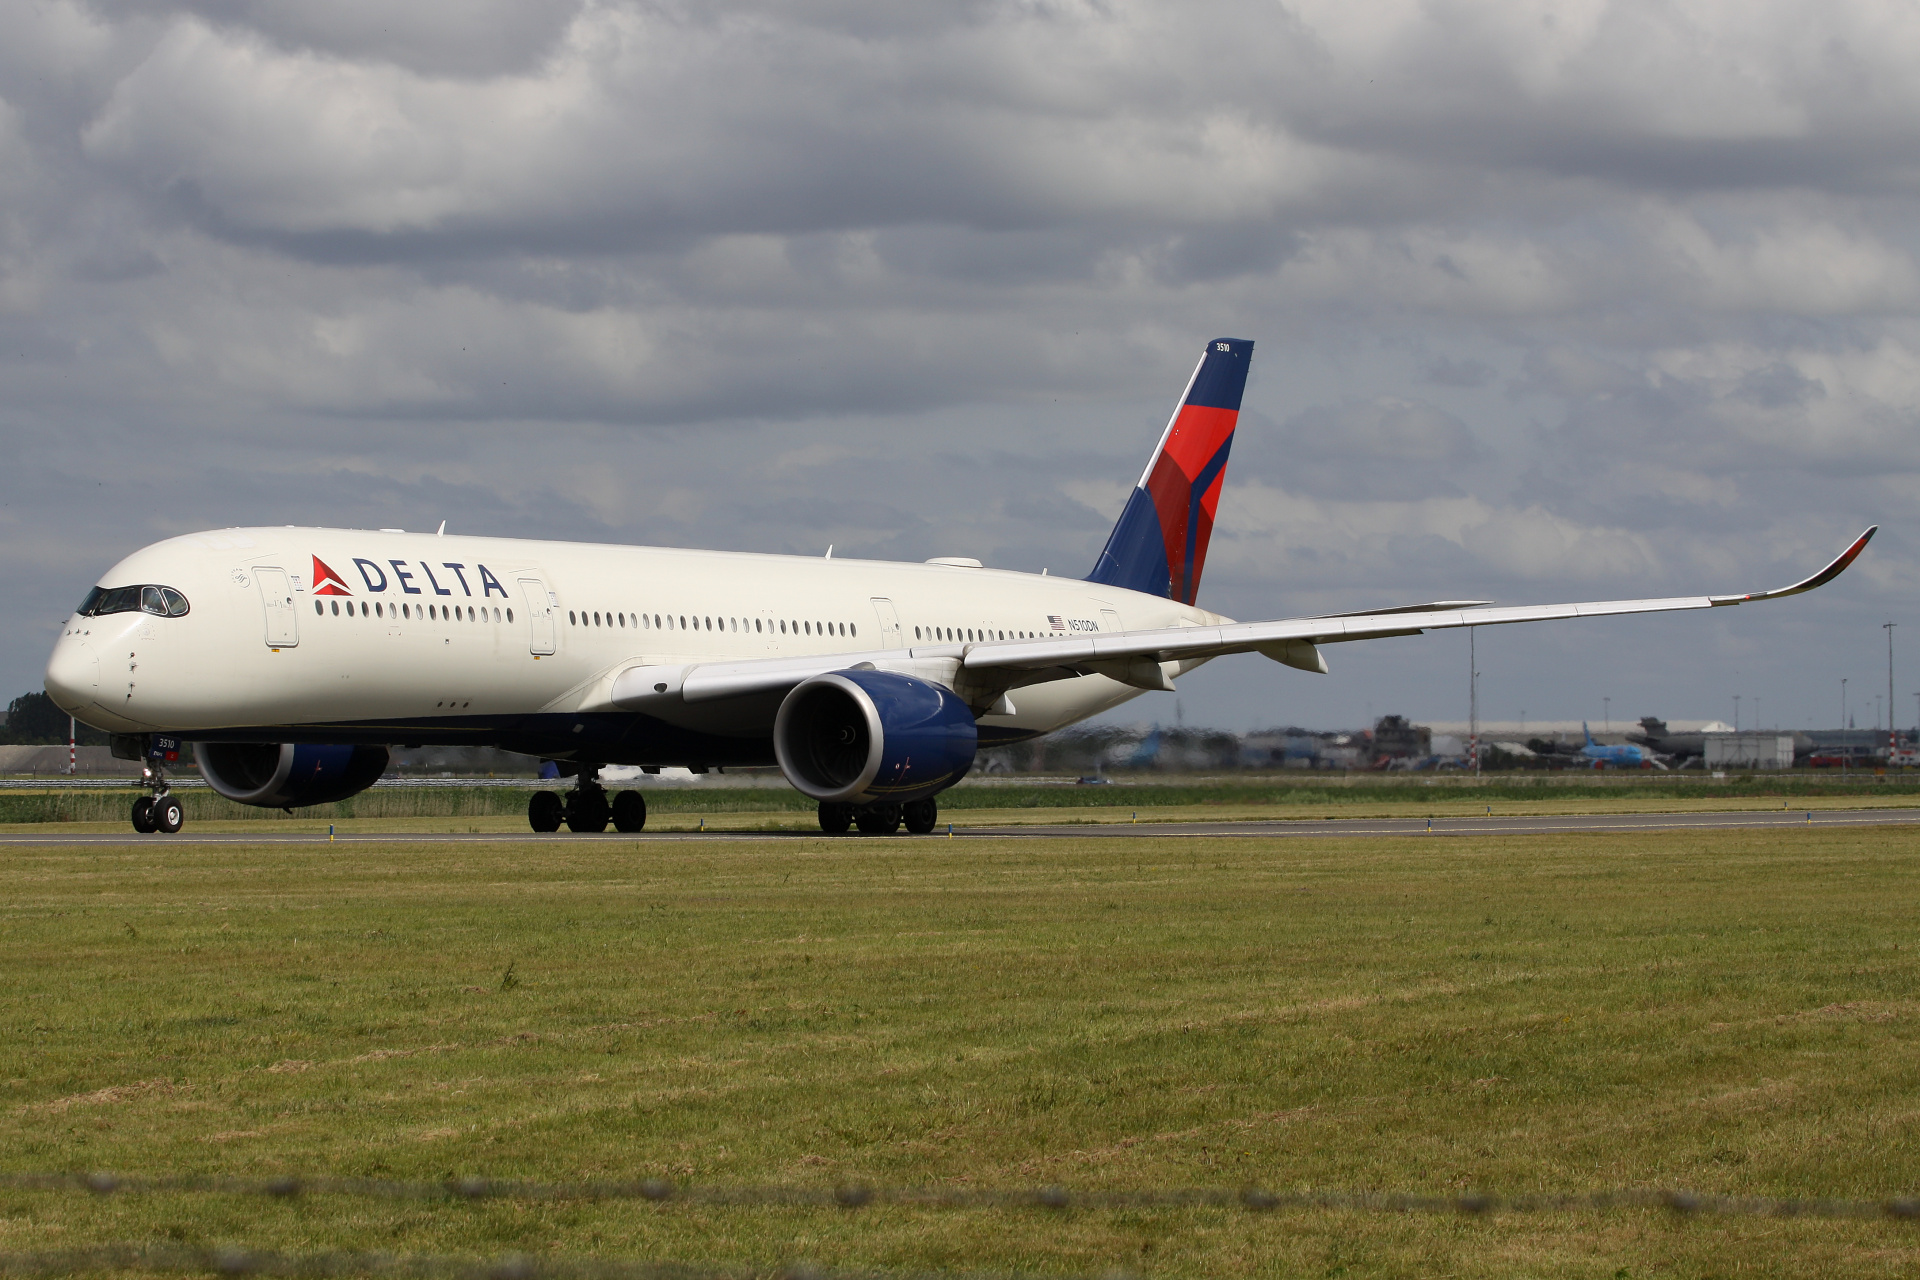 N510DN (Aircraft » Schiphol Spotting » Airbus A350-900 » Delta Airlines)